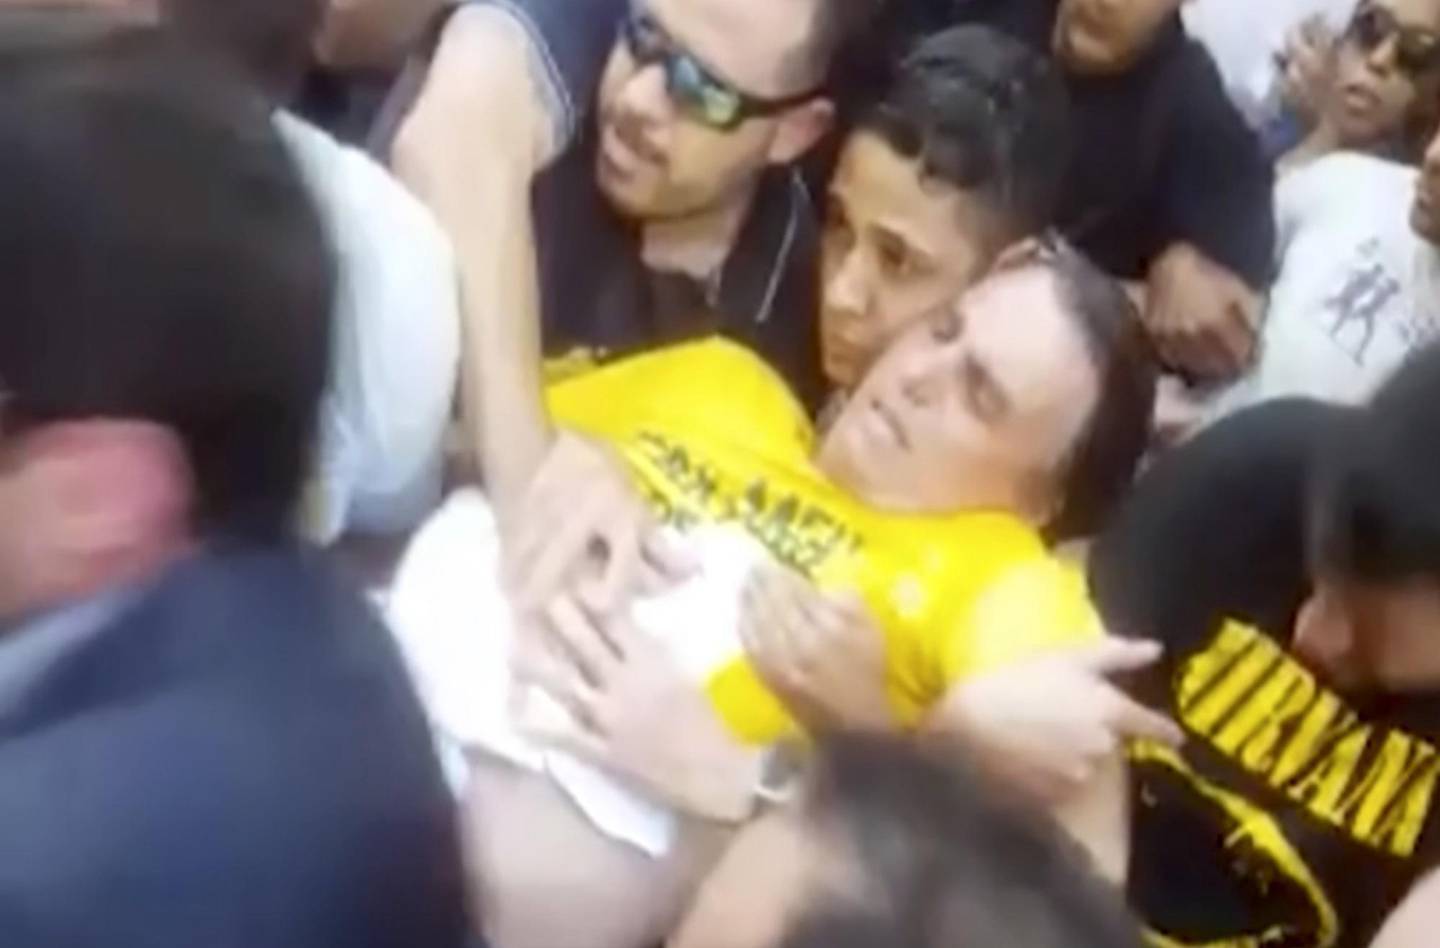 BEST QUALITY AVAILABLE - In this video still provided by Fernando Goncalves, National Social Liberal Party presidential candidate Jair Bolsonaro is carried away after being stabbed during a campaign rally in Juiz de Fora, Brazil, Thursday, Sept. 6, 2018. Officials and Bolsonaro's son said the far-right candidate was in stable condition, though the son also said Bolsonaro suffered severe blood loss and arrived to the hospital "almost dead." (AP Photo/Fernando Goncalves)